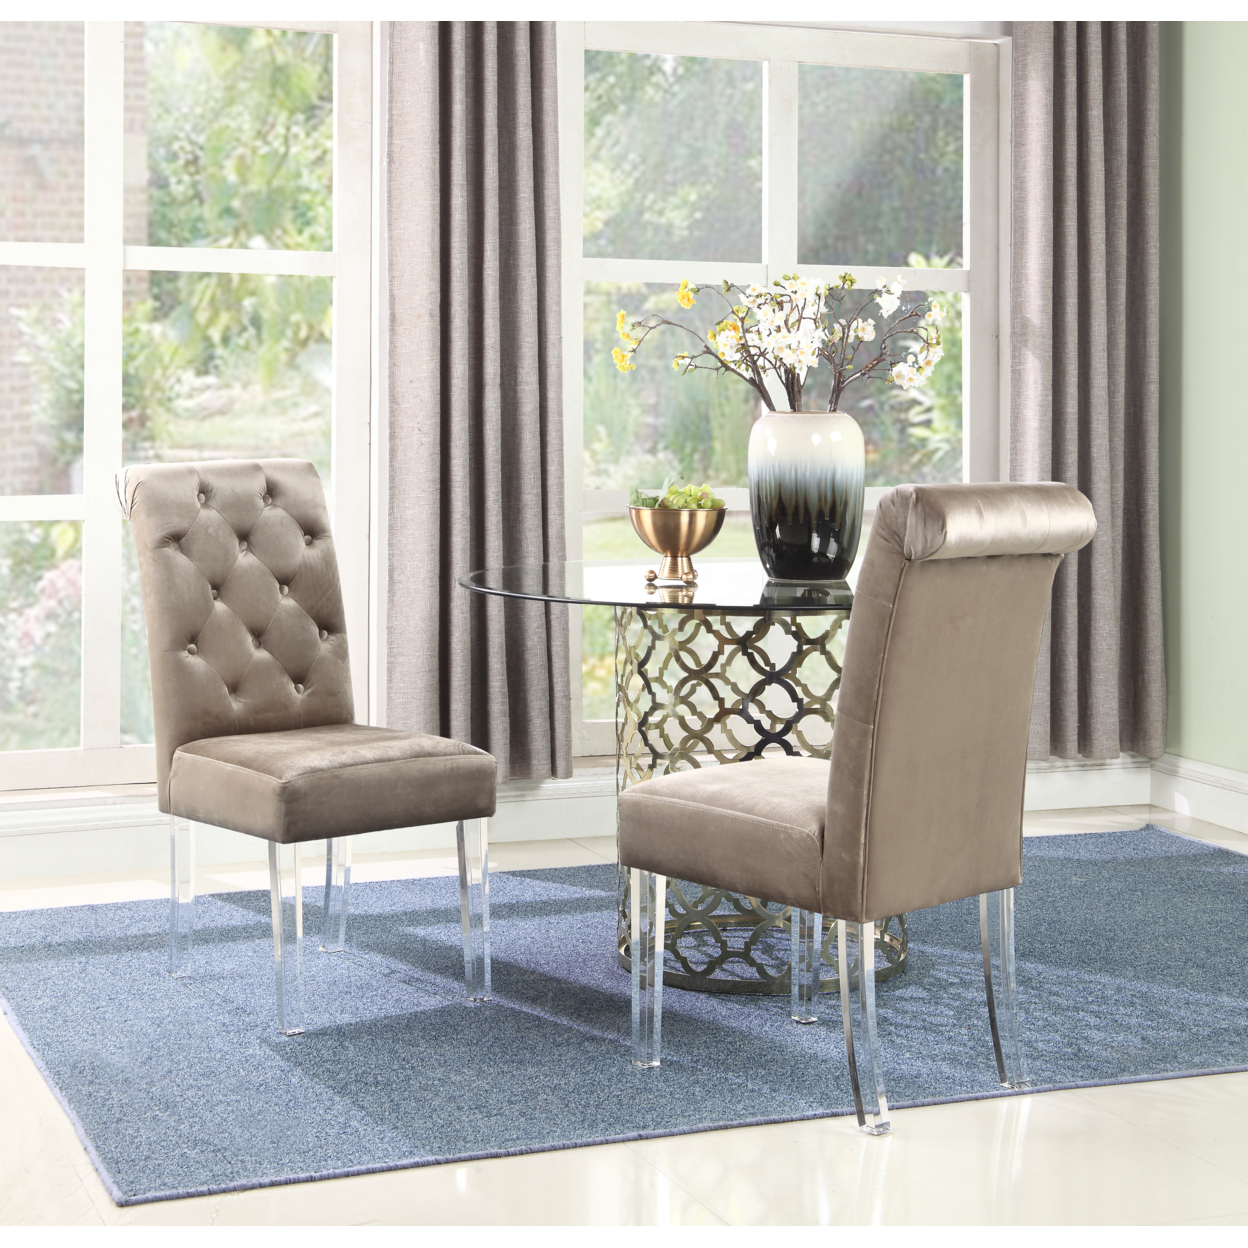 Helga Dining Side Chair Button Tufted Velvet Upholstered Acrylic Legs (Set Of 2) - Taupe